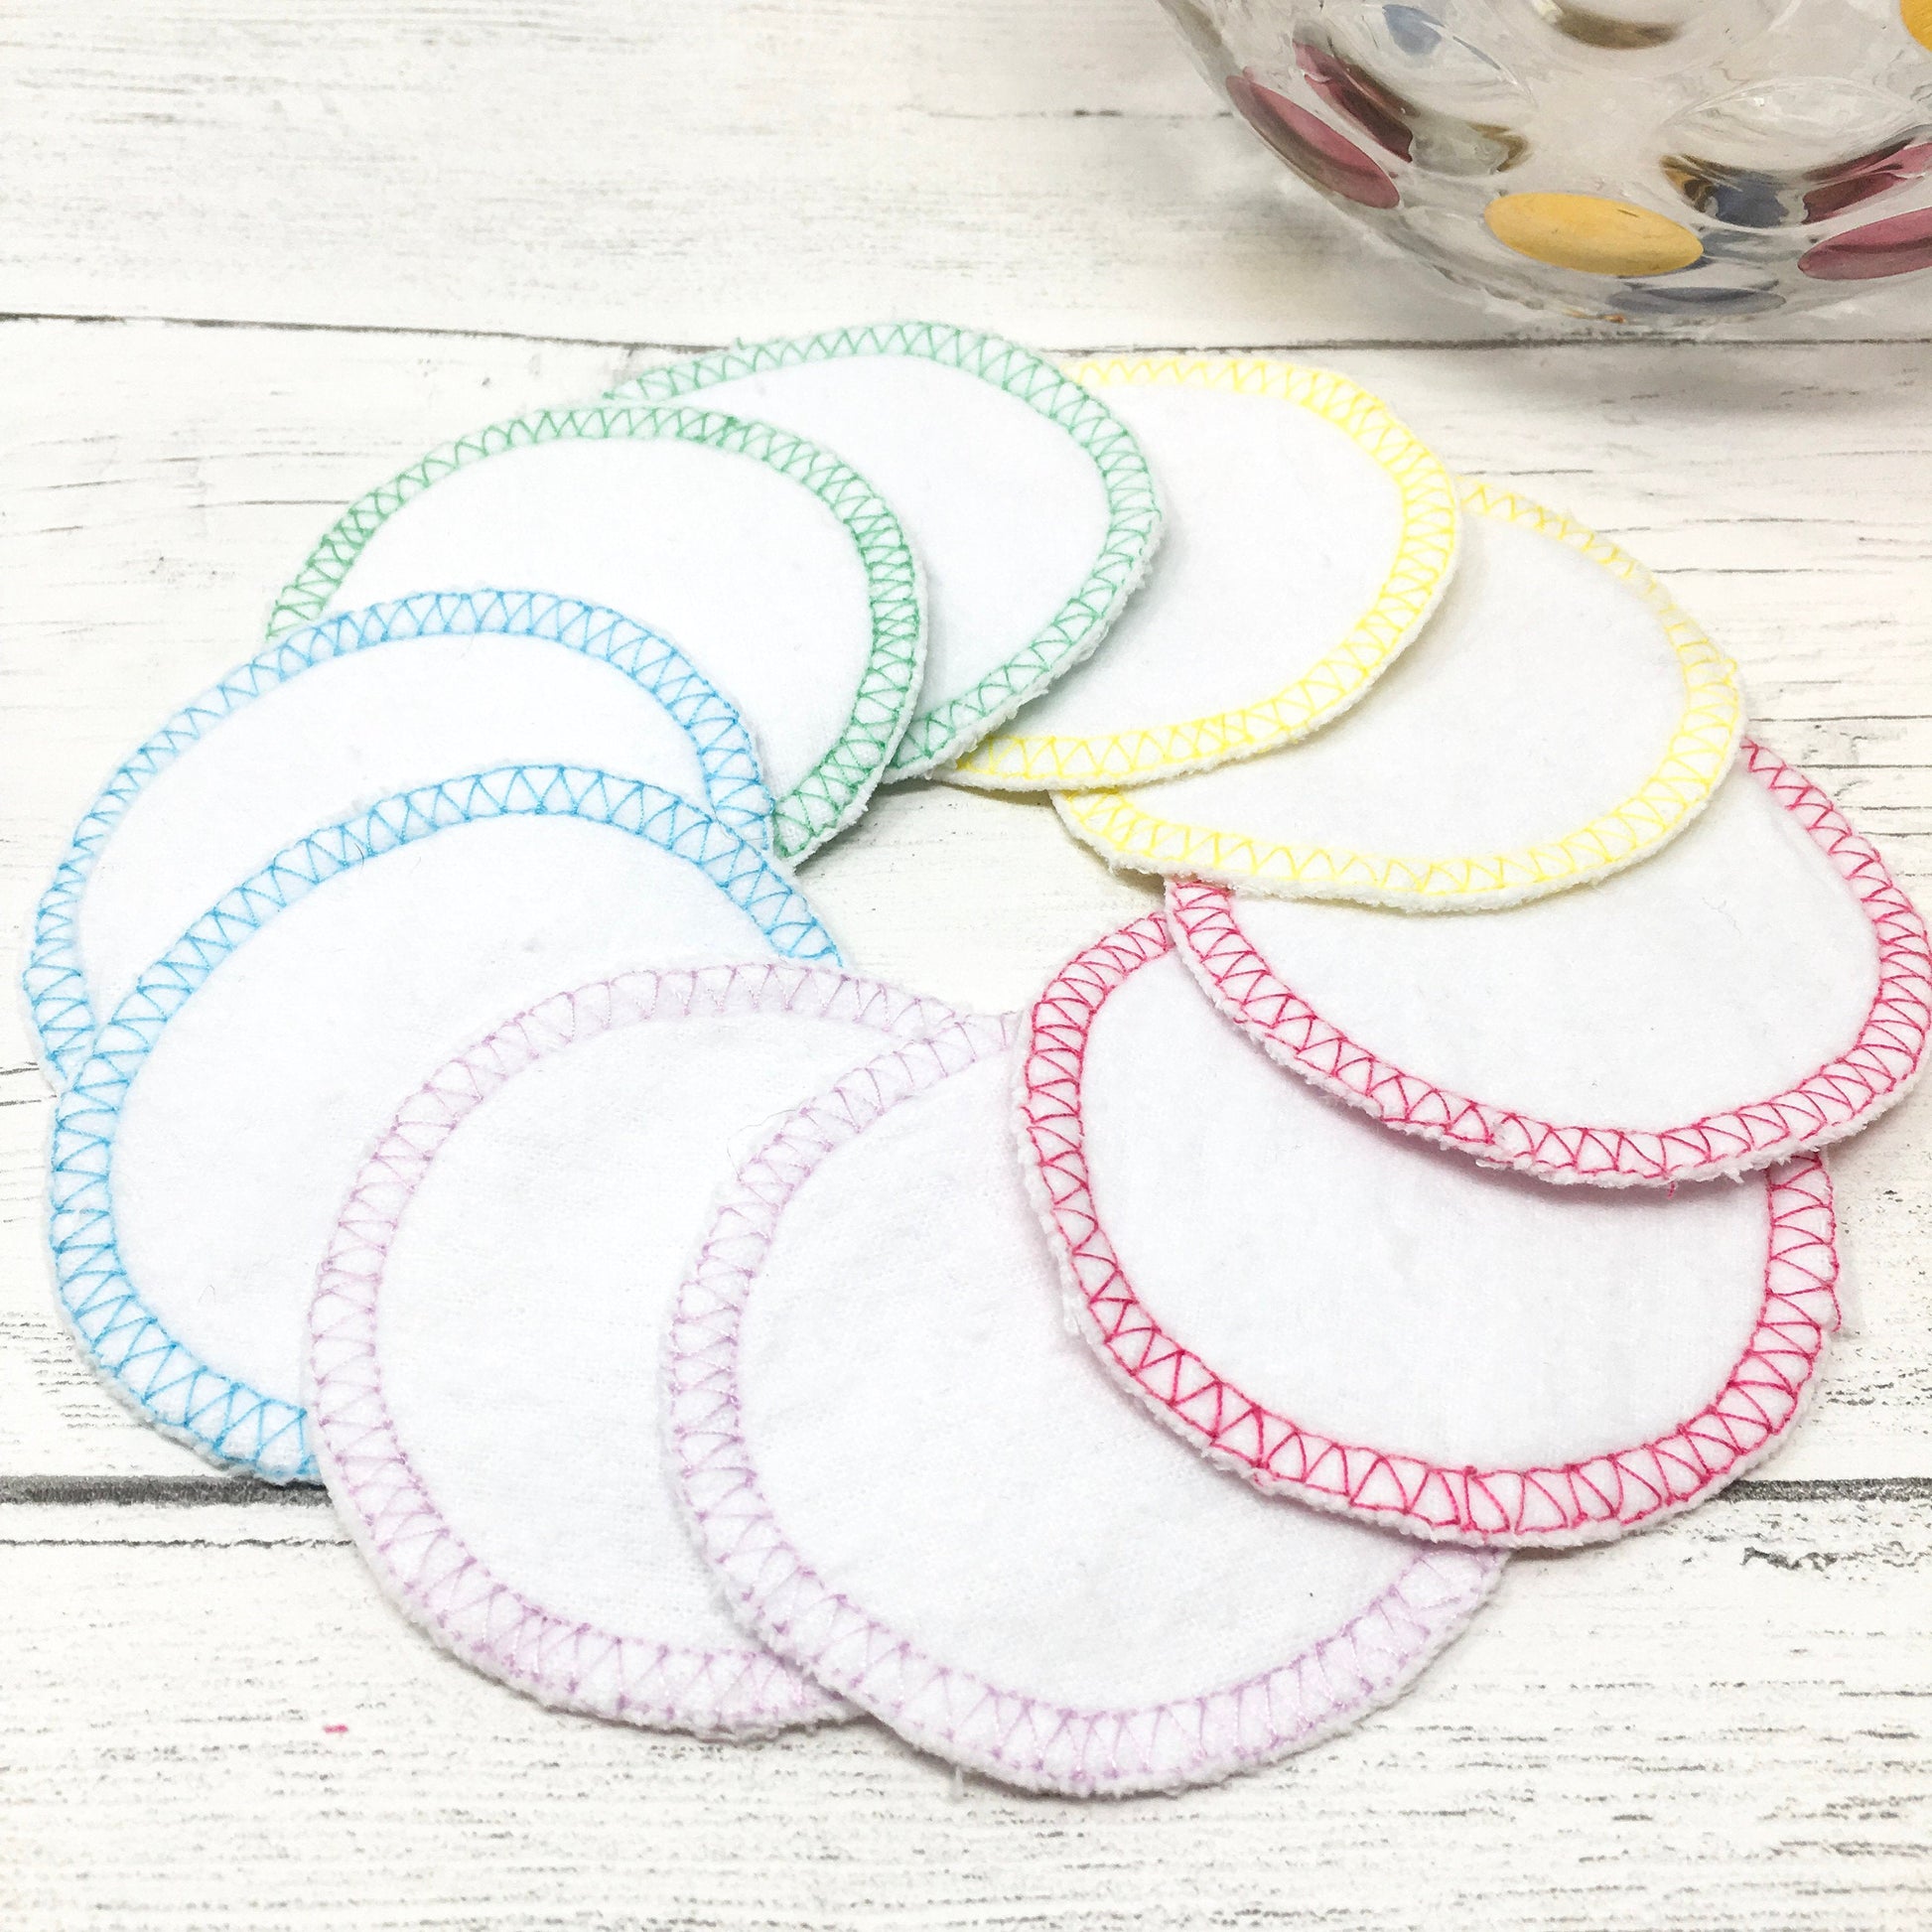 Set of 10 Reusable Facial Rounds or Wipes